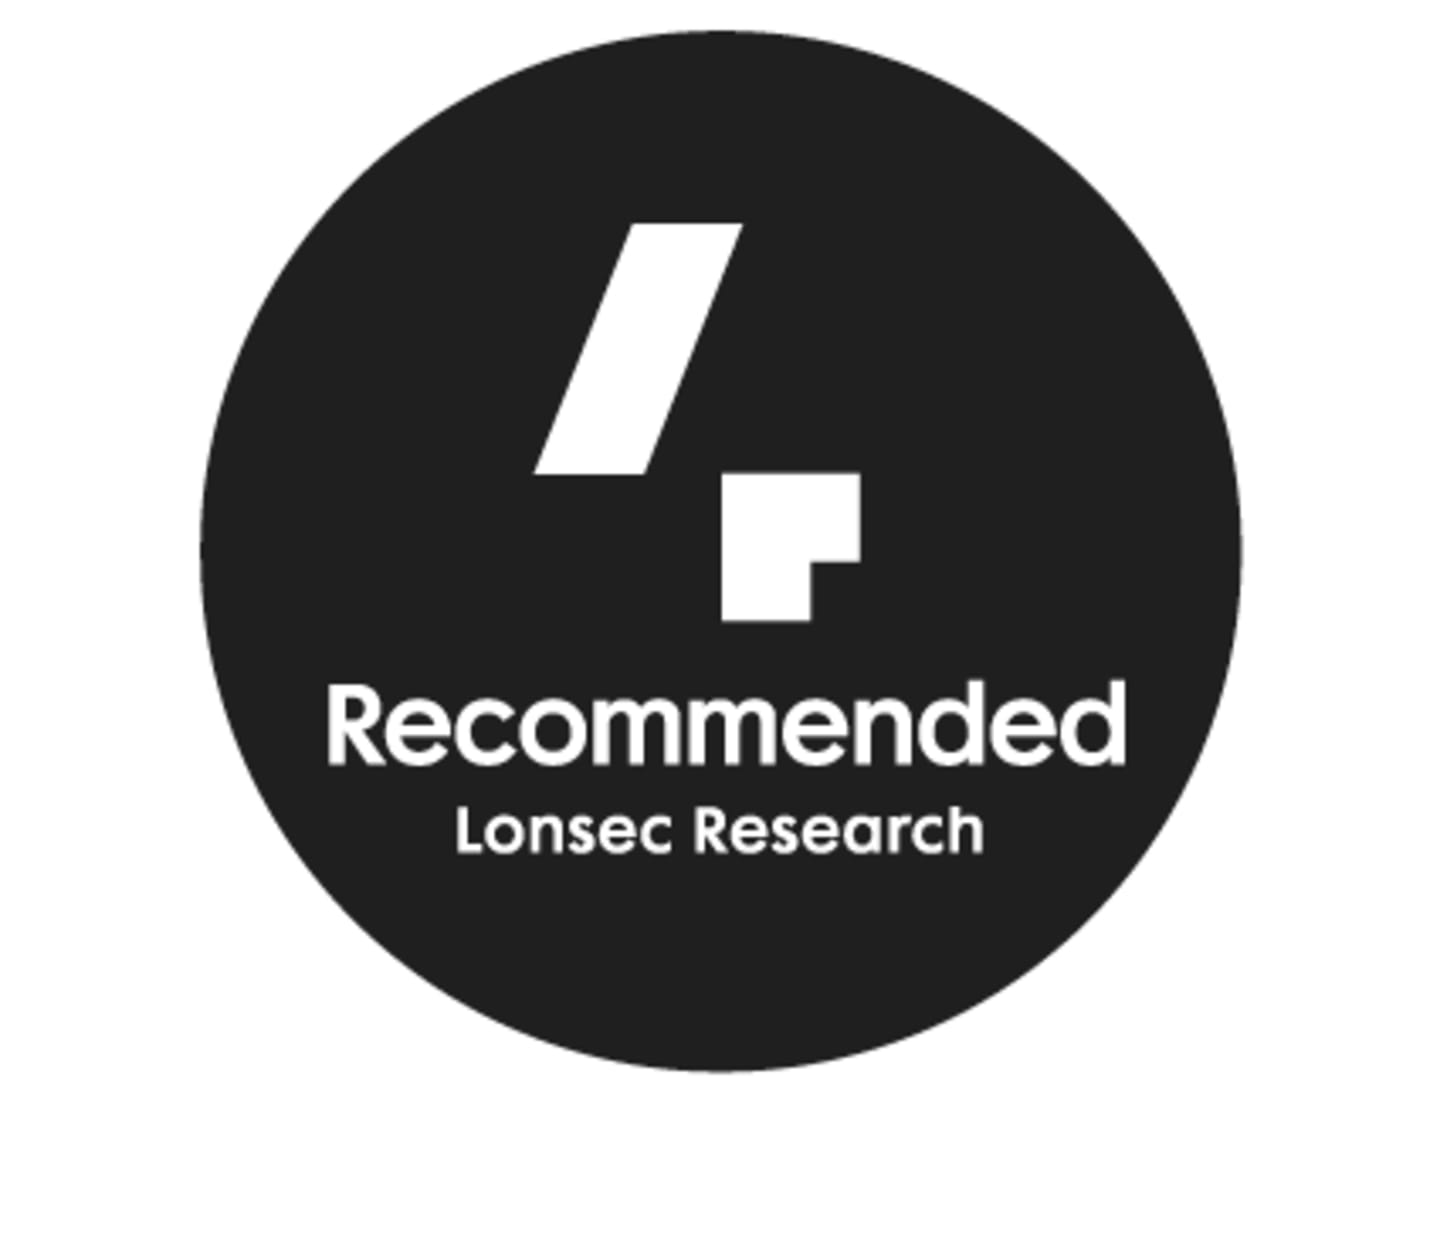 Lonsac Research Recommended logo